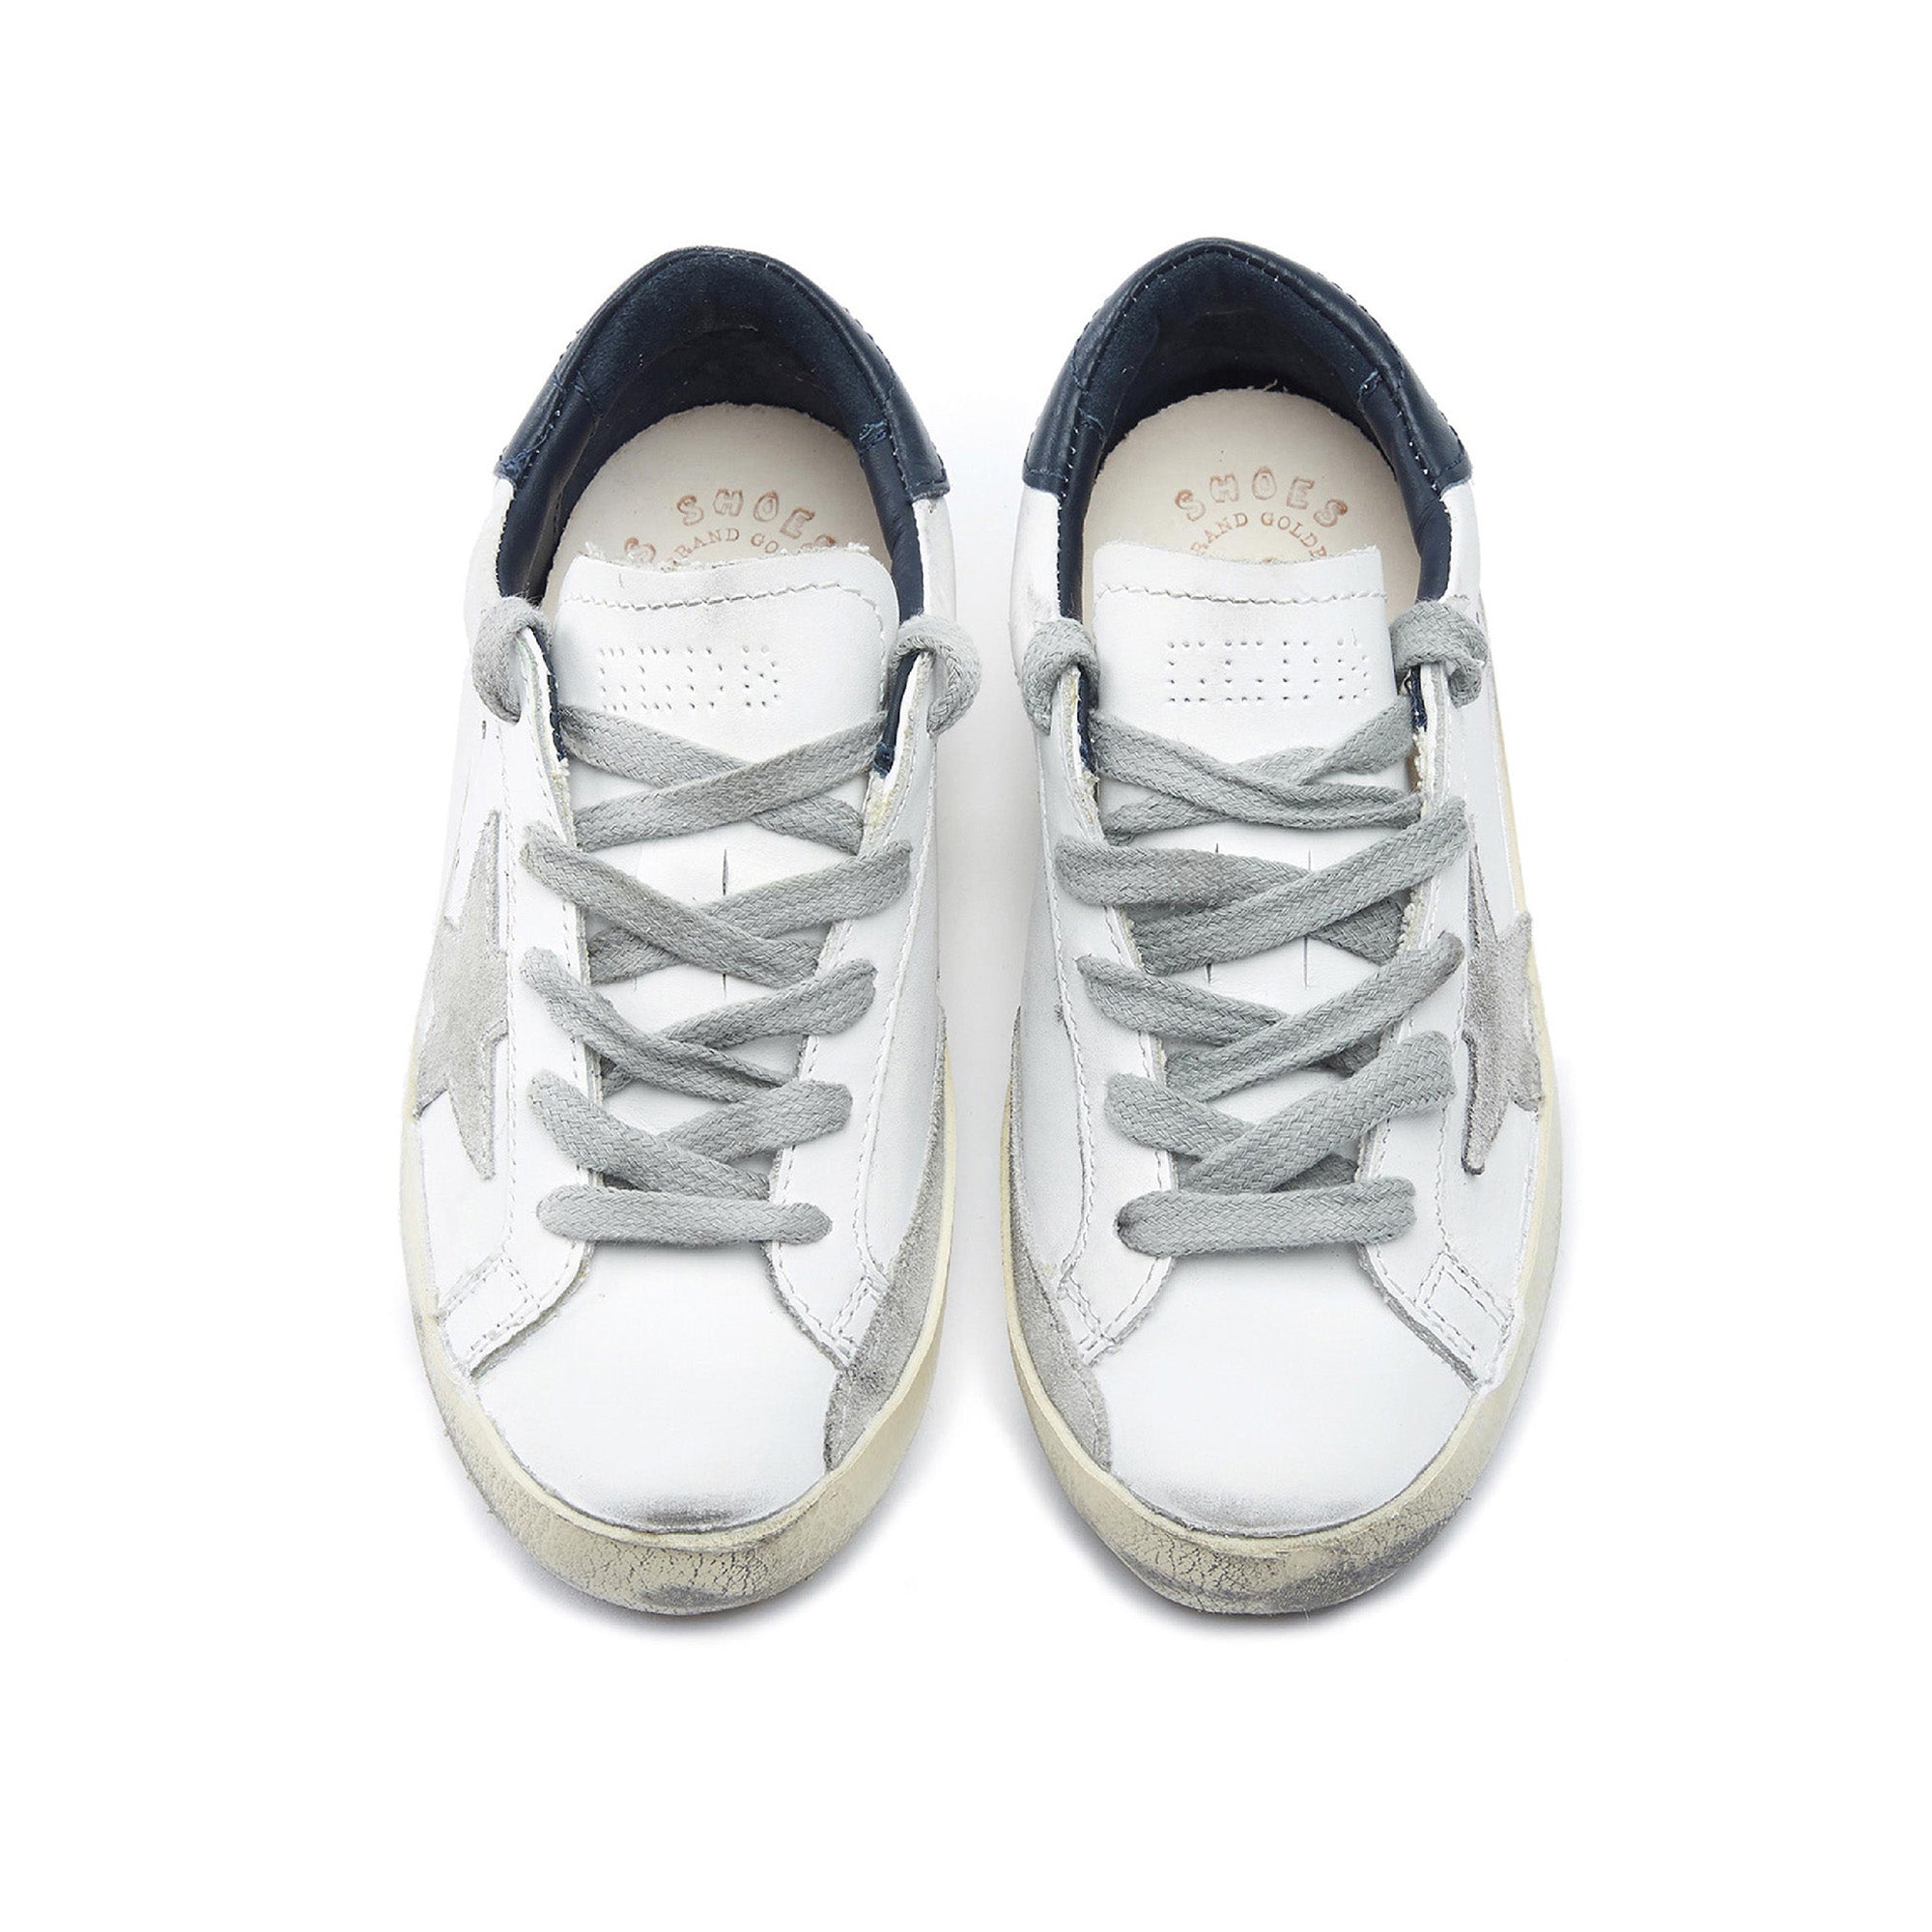 Boys & Girls White Star Leather Shoes